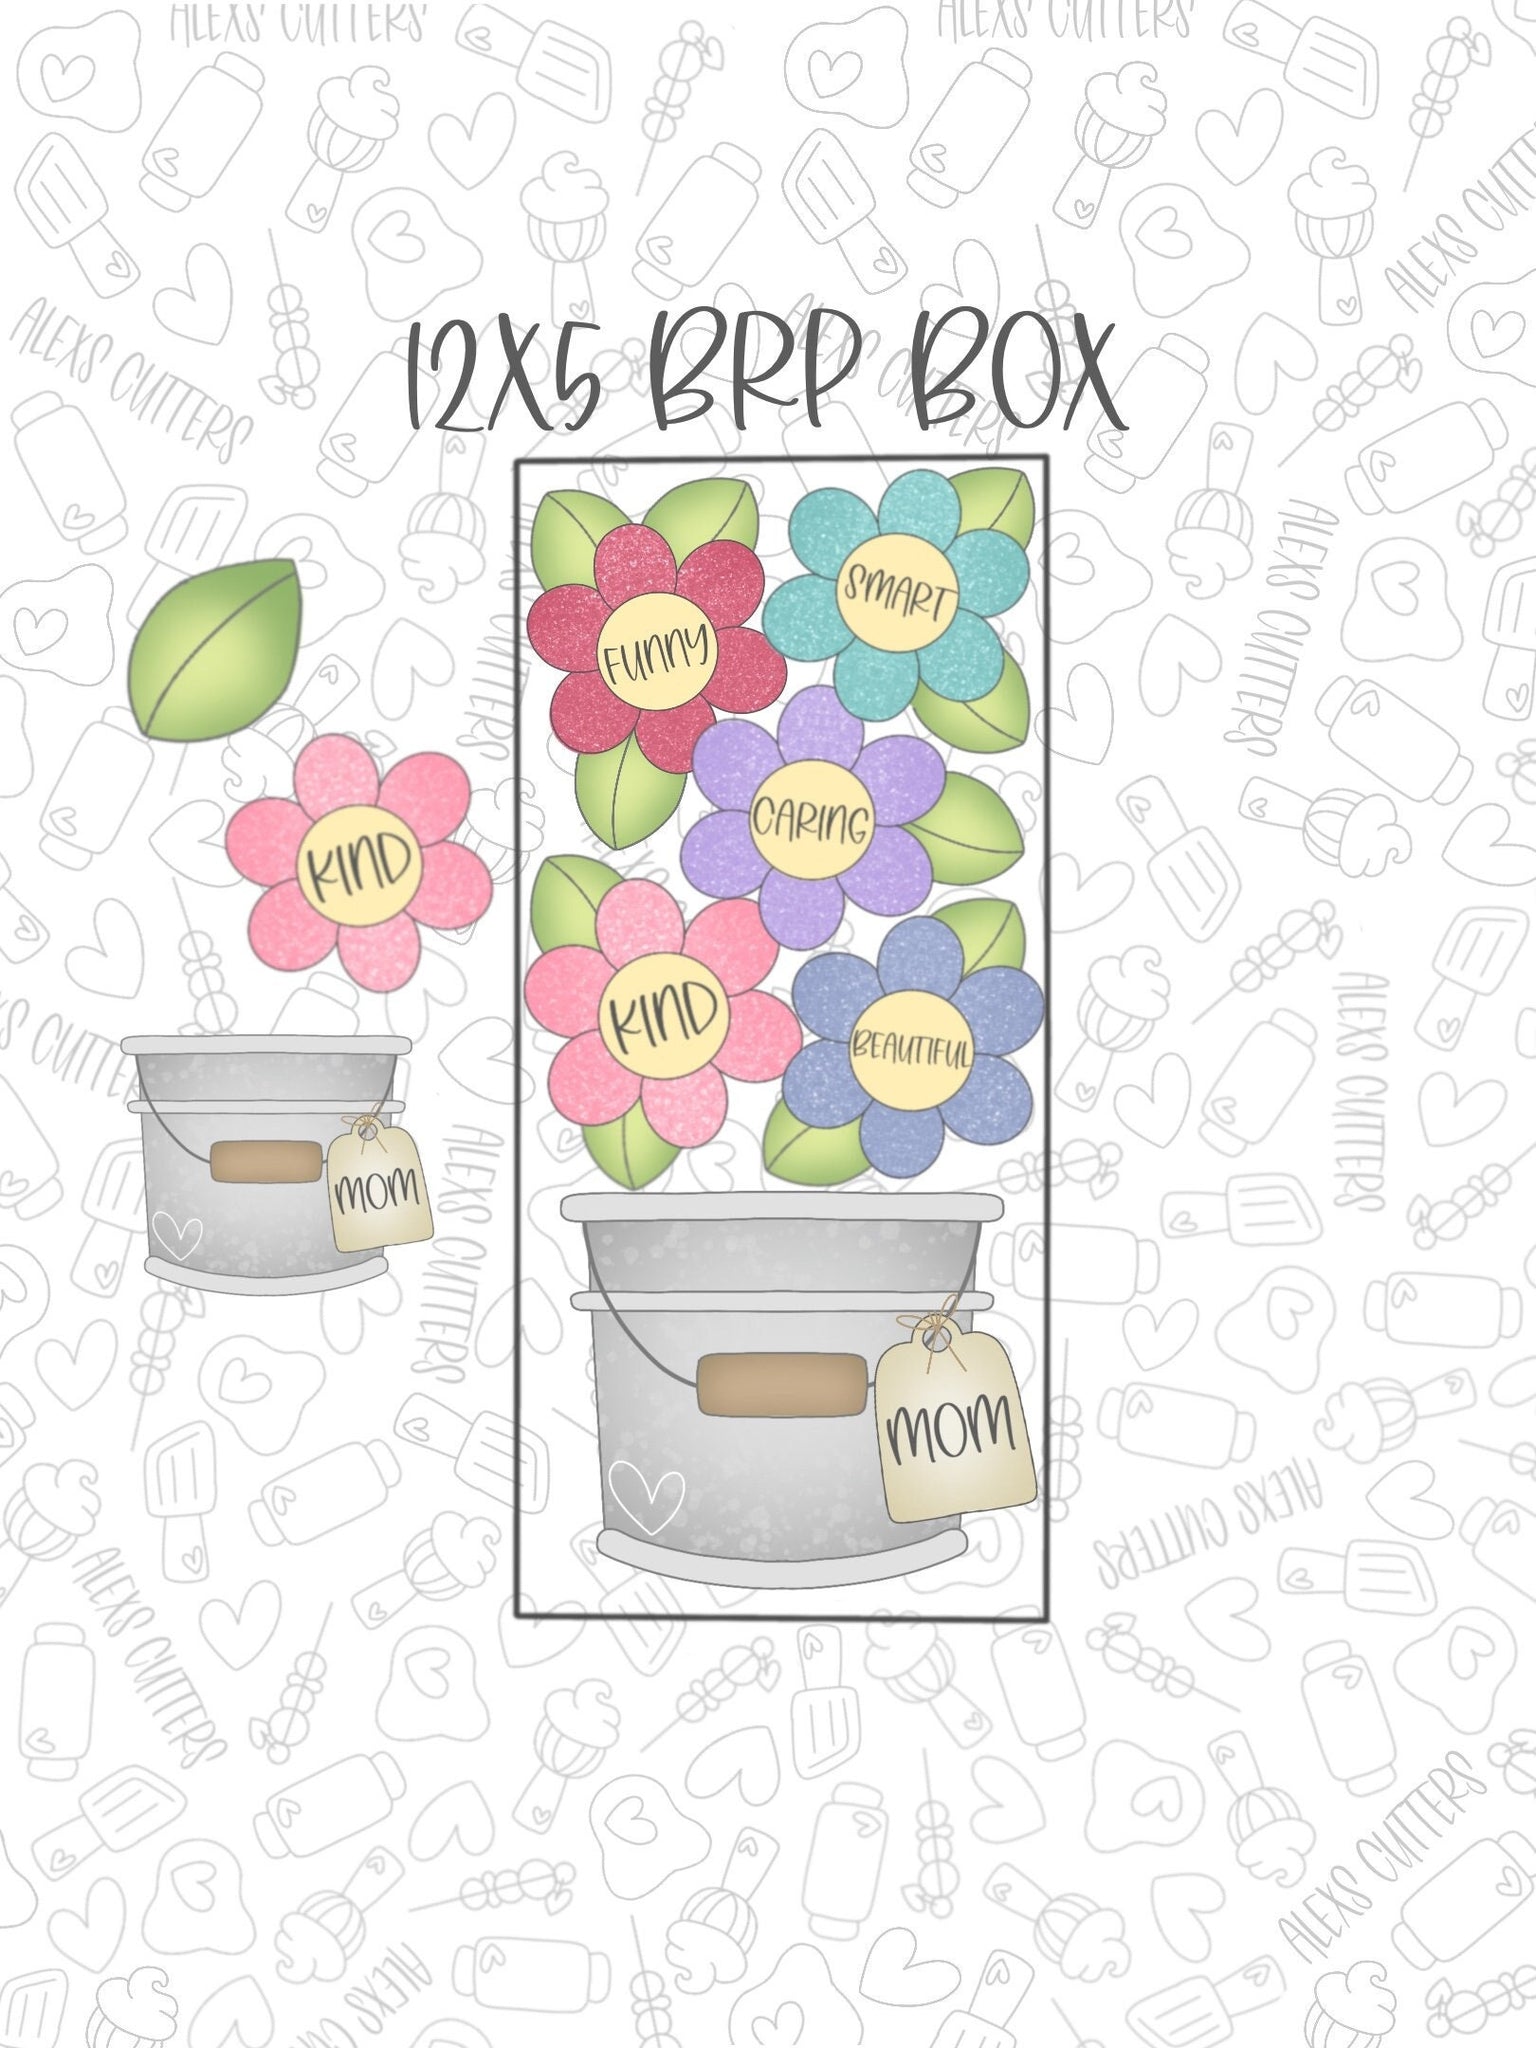 Compliment Flower Collection Fits in 12x5 BRP Box